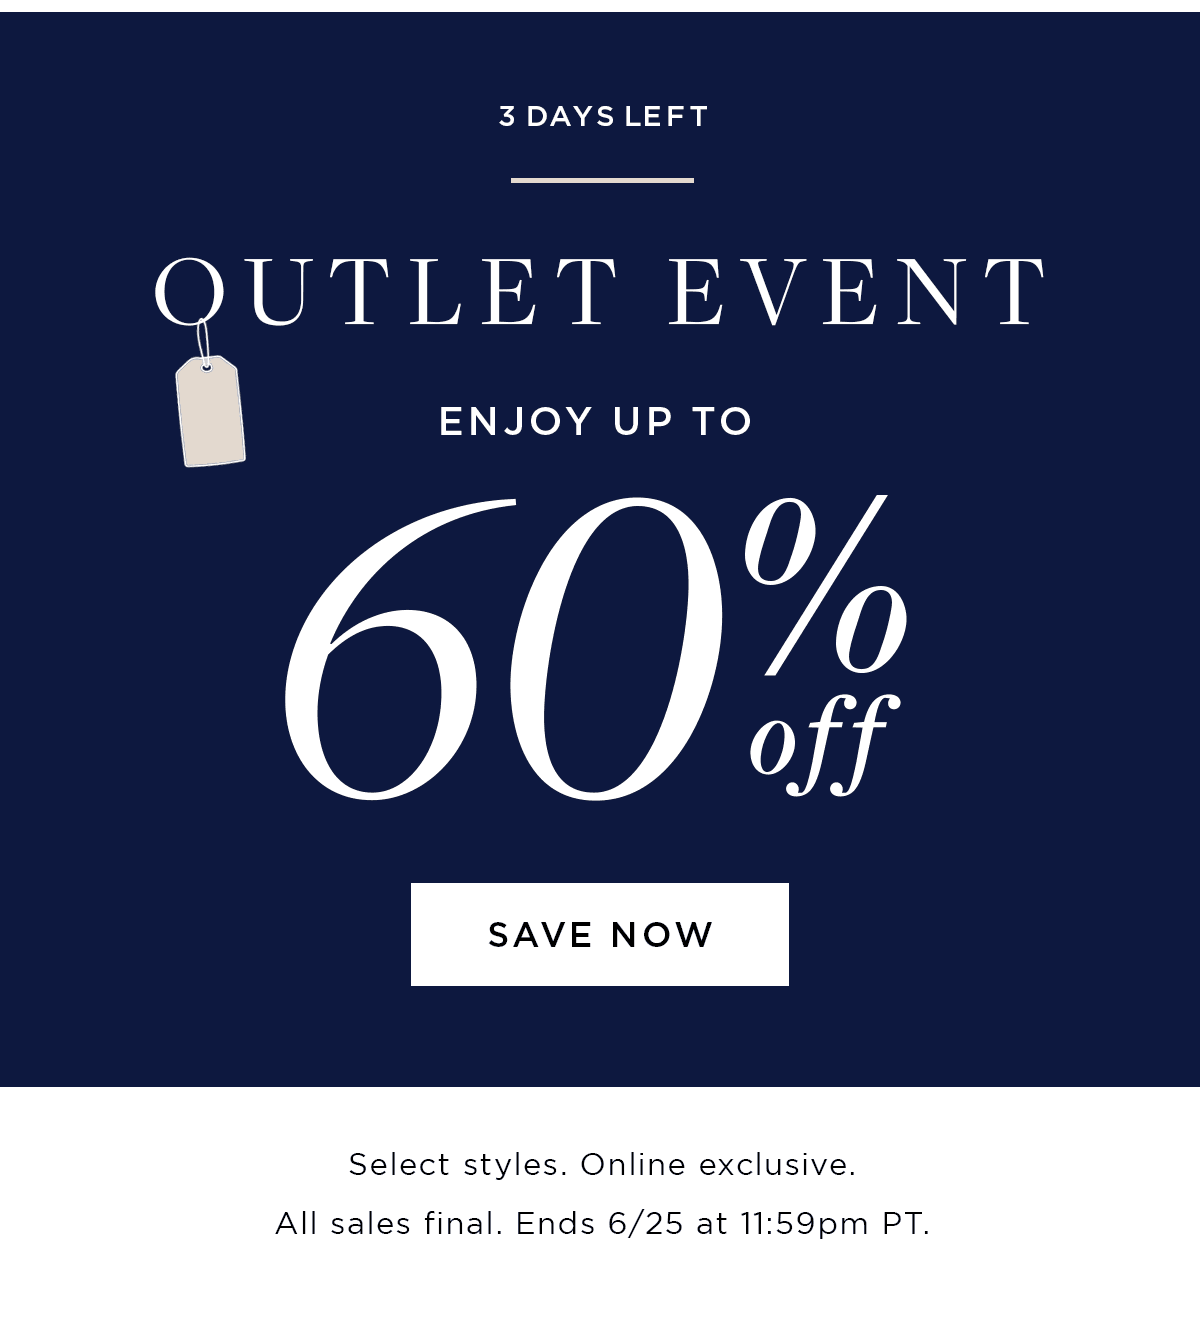 BRAHMIN OUTLETS UP TO 60% OFF HANDBAGS and WALLETS 